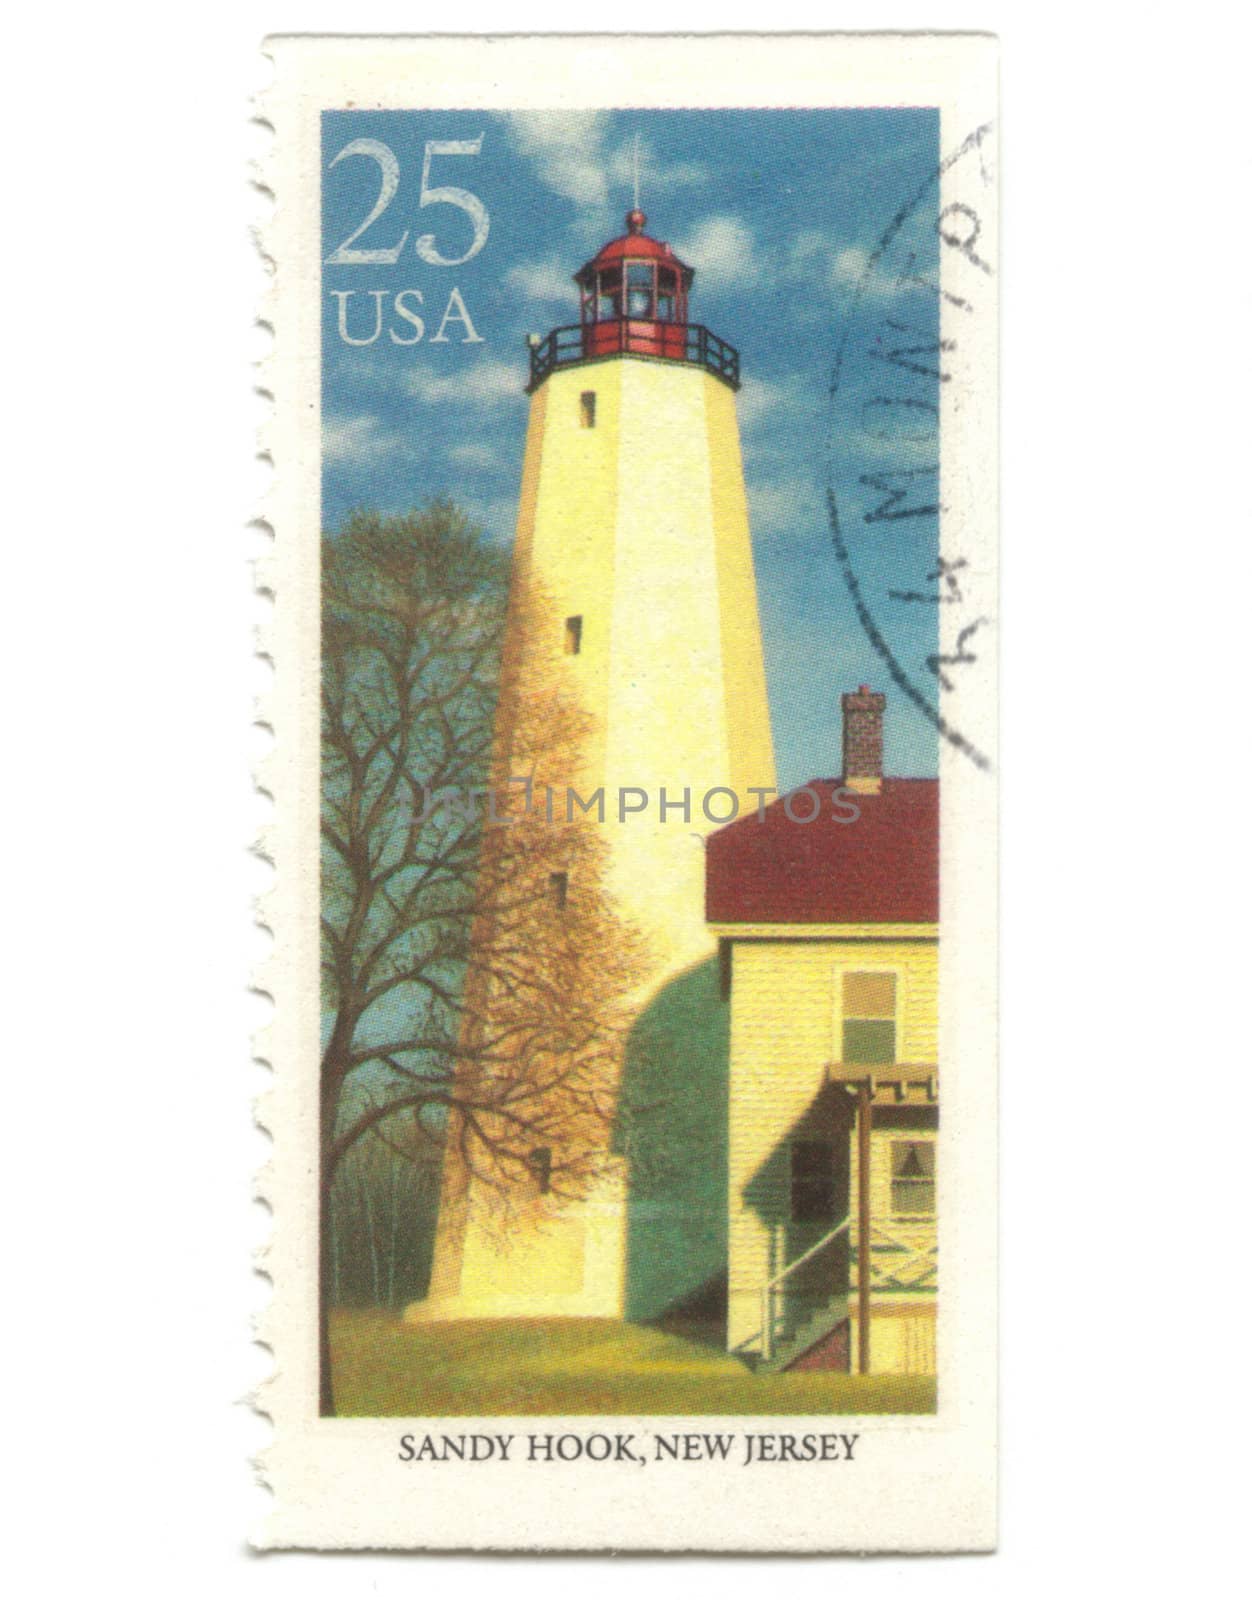 Old postage stamp from USA with Lighthouse - Sandy Hook, New Jersey